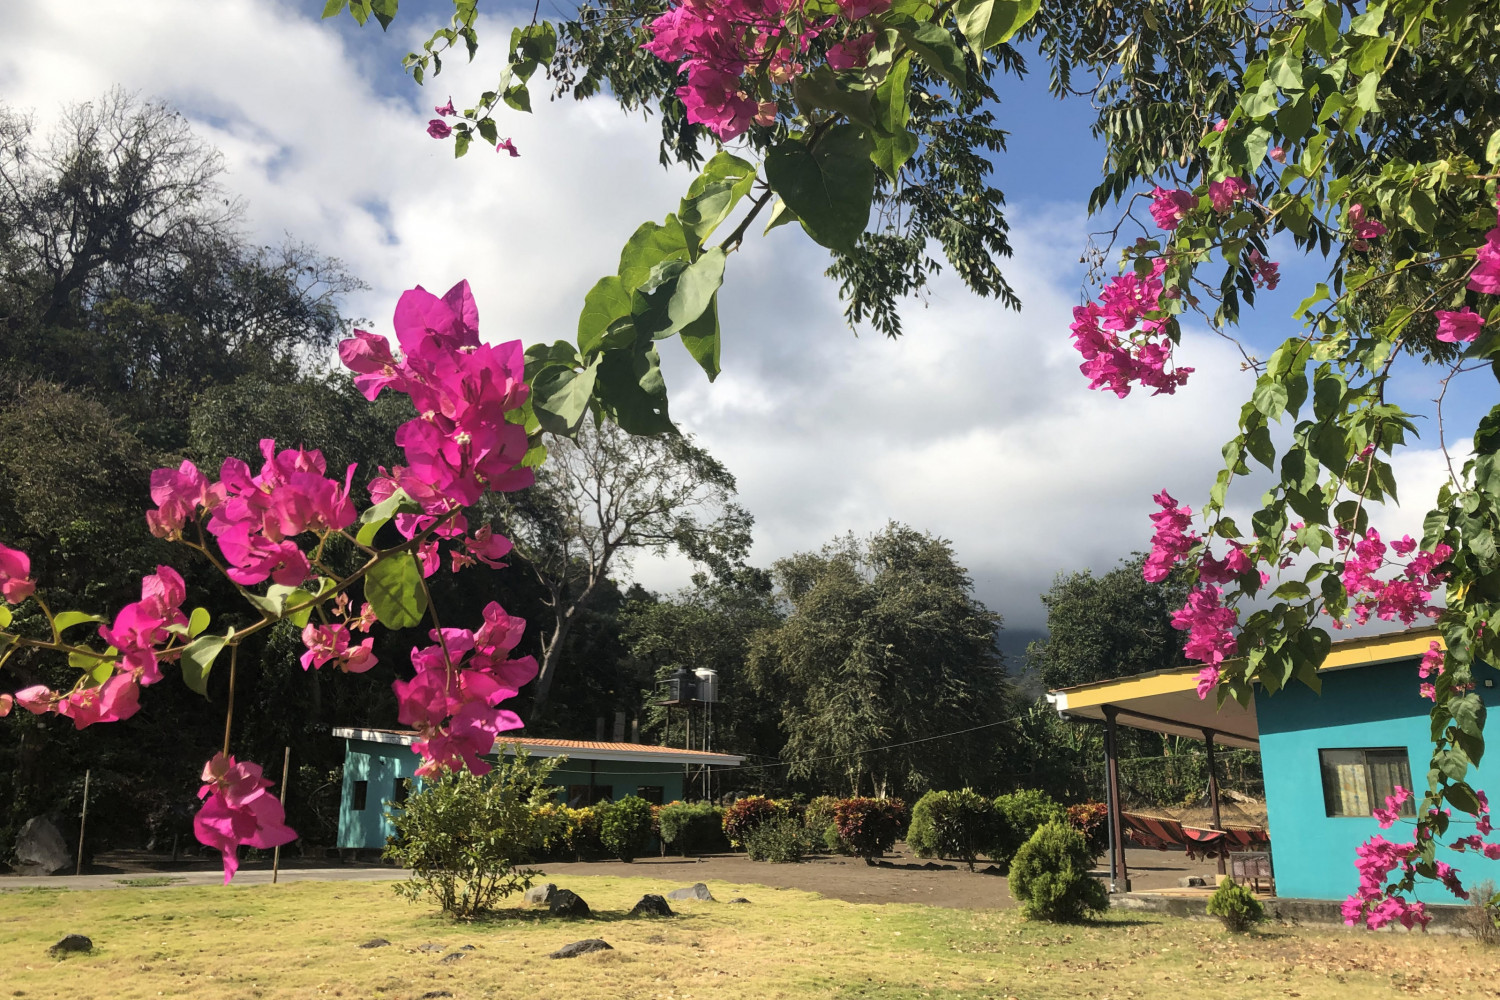 Flowers blossoming in Nicaragua during the summer.